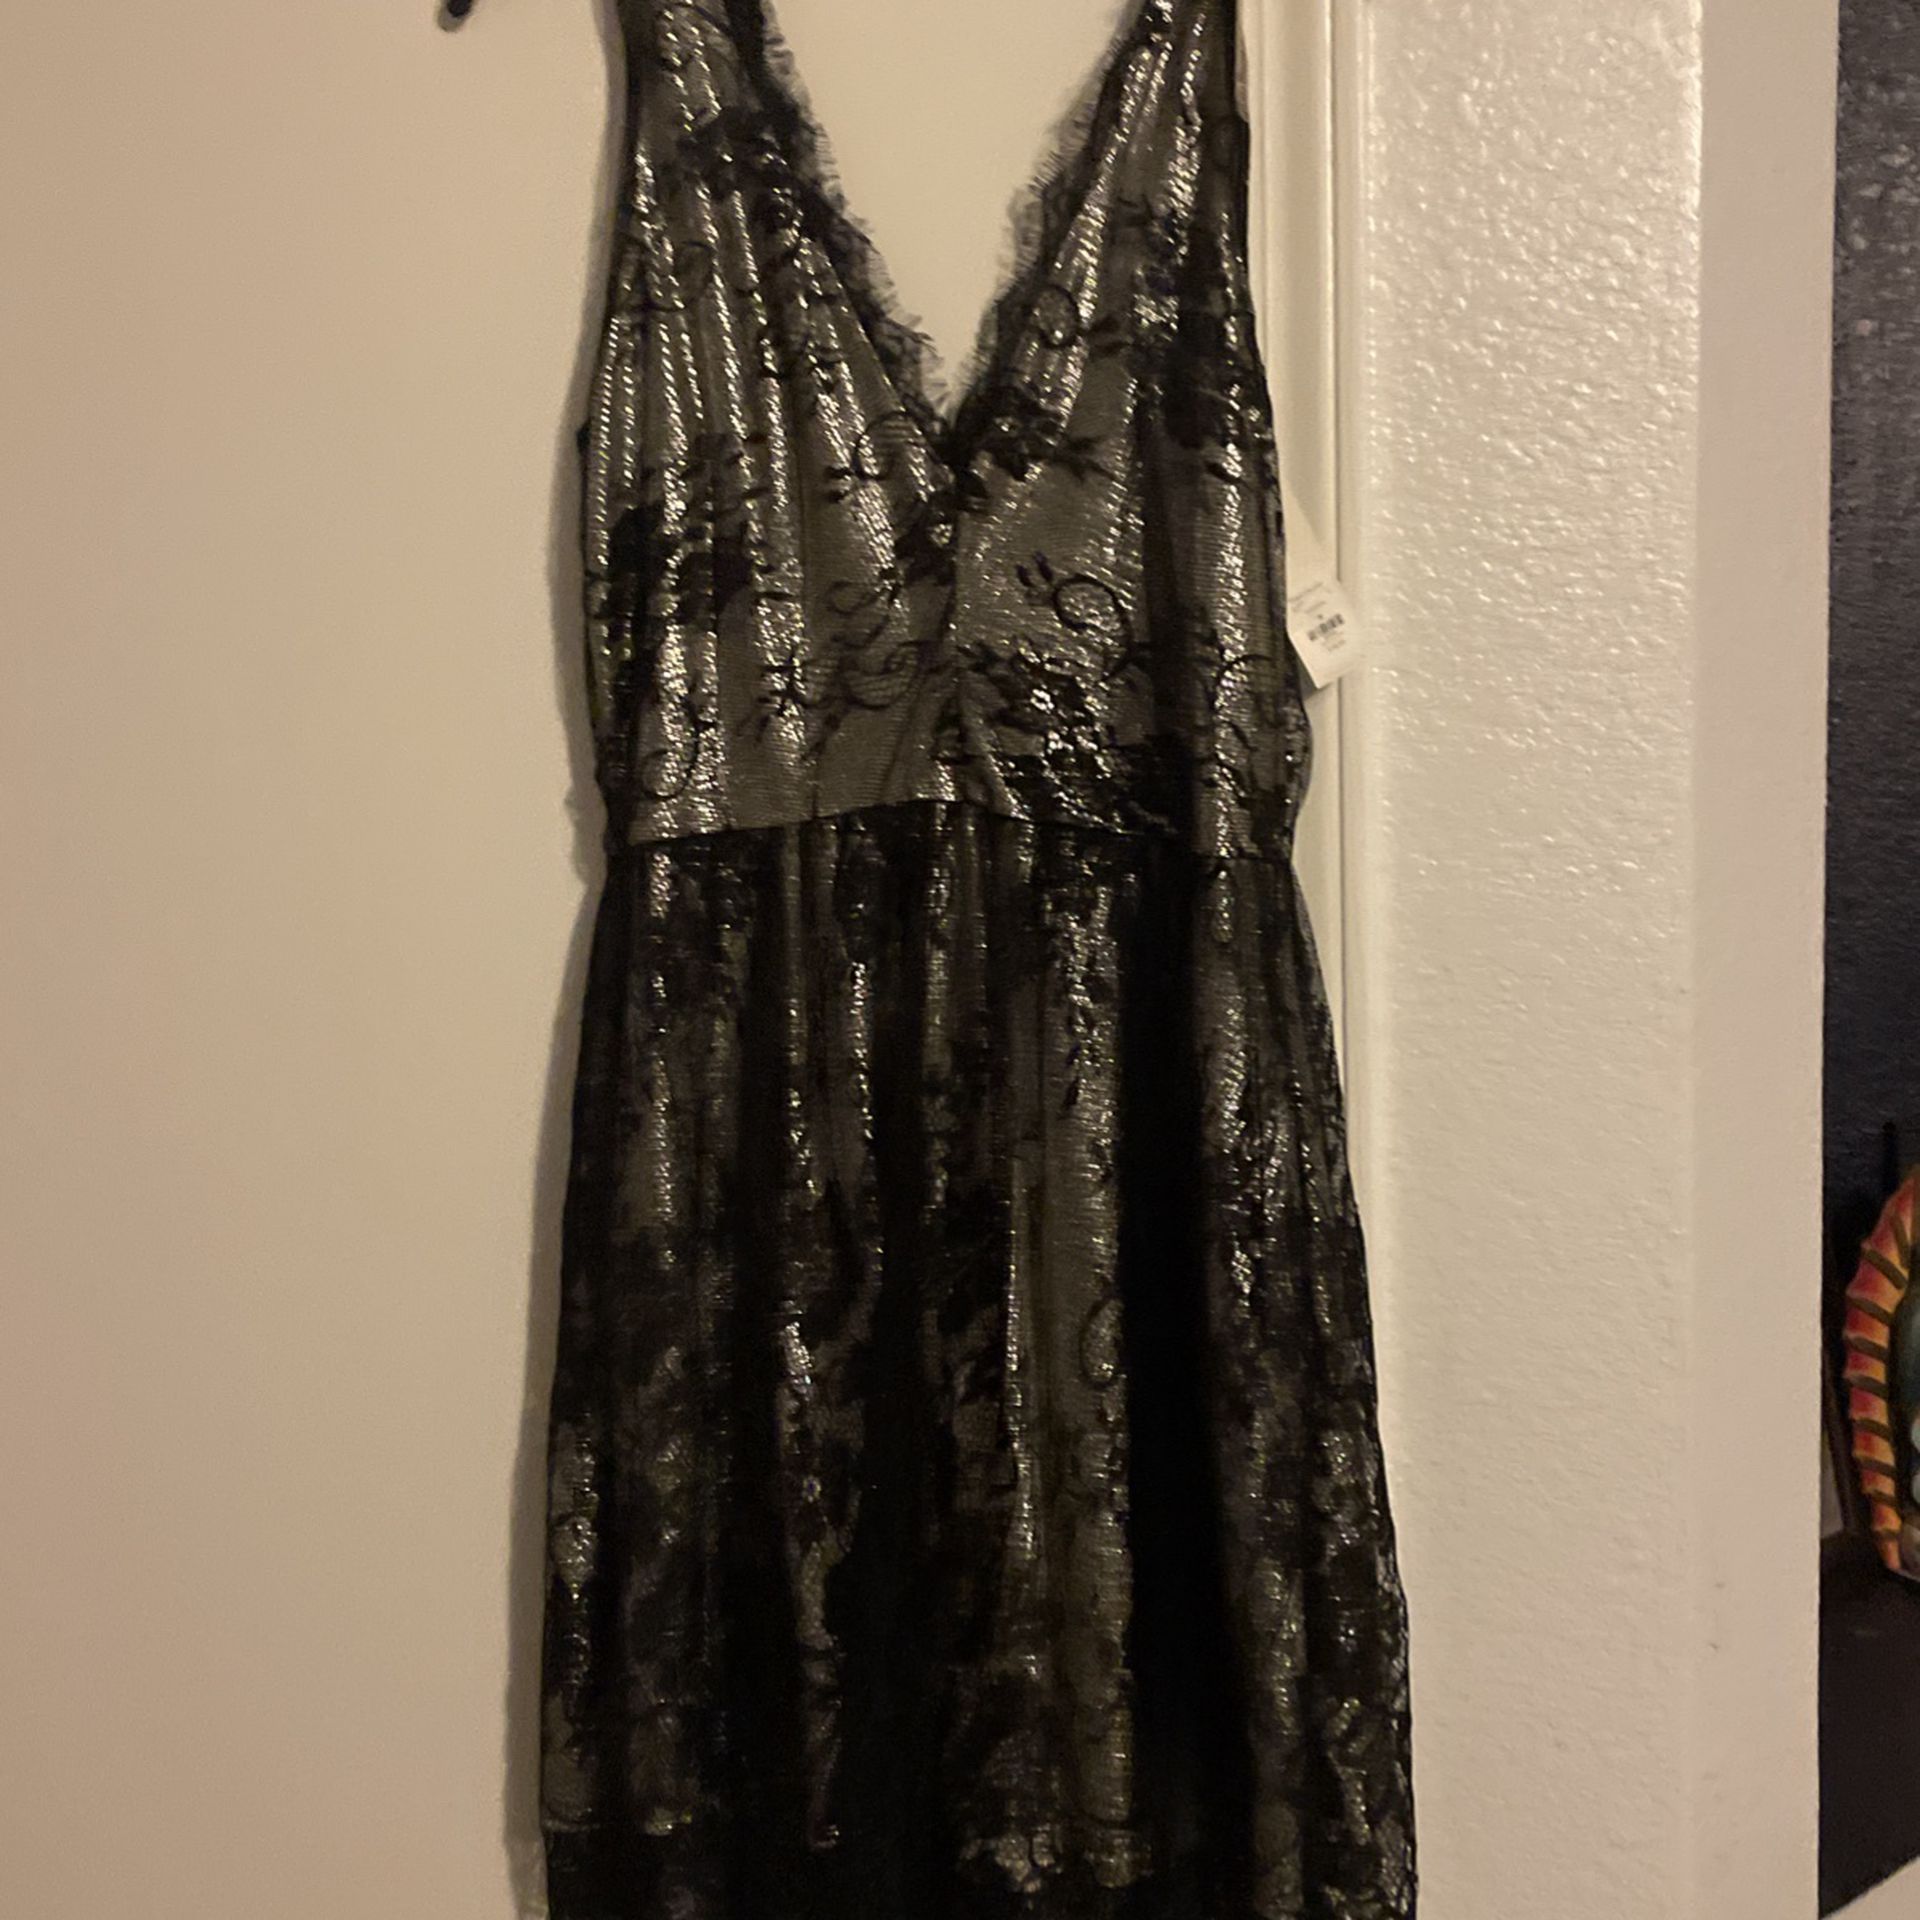 New With Tag Women’s Size Medium Party Dress $15